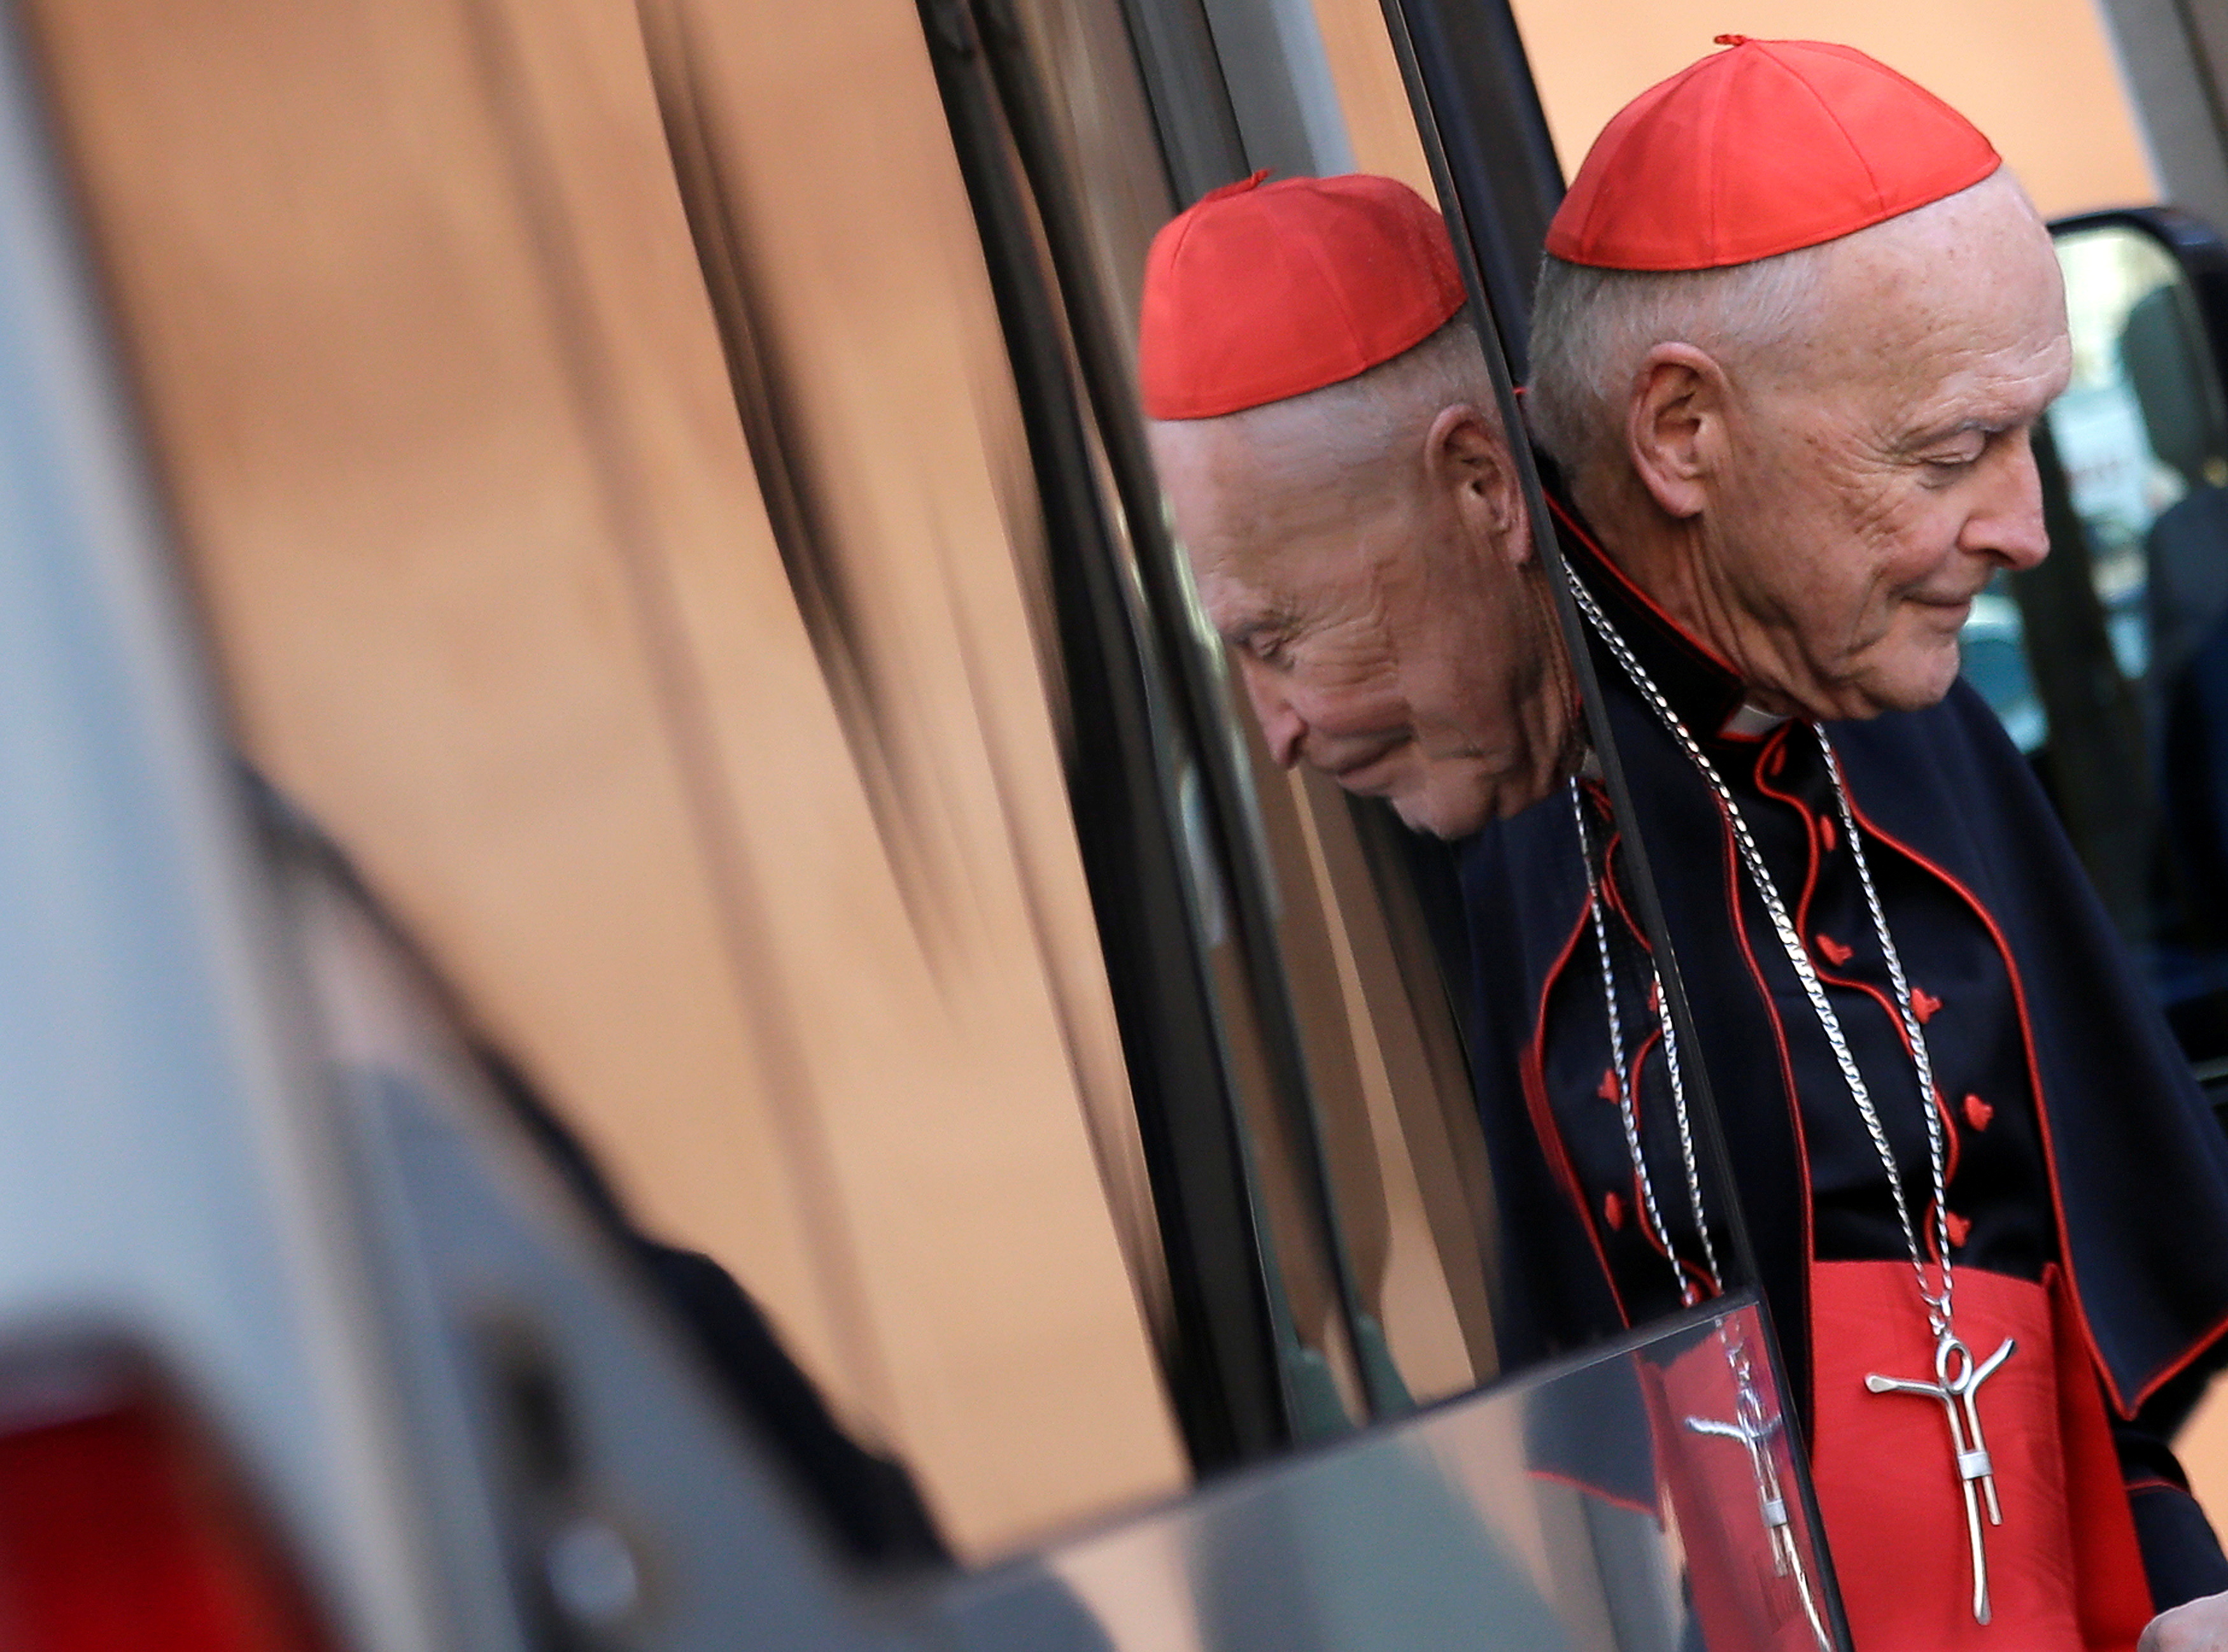 U.S. Cardinal McCarrick arrives for a meeting at the Synod Hall in the Vatican